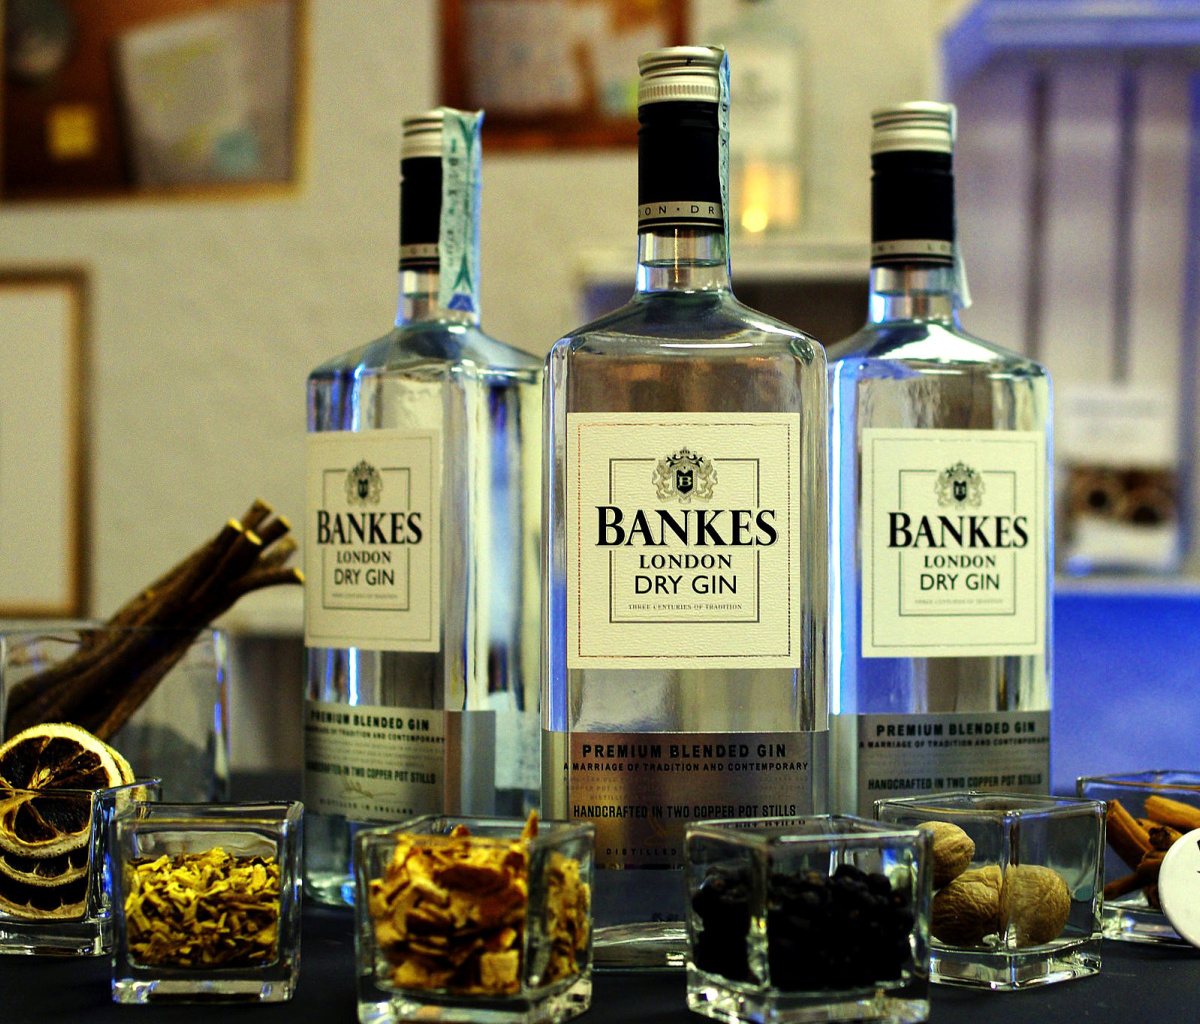 Dry Gin Bankers wallpaper 1200x1024